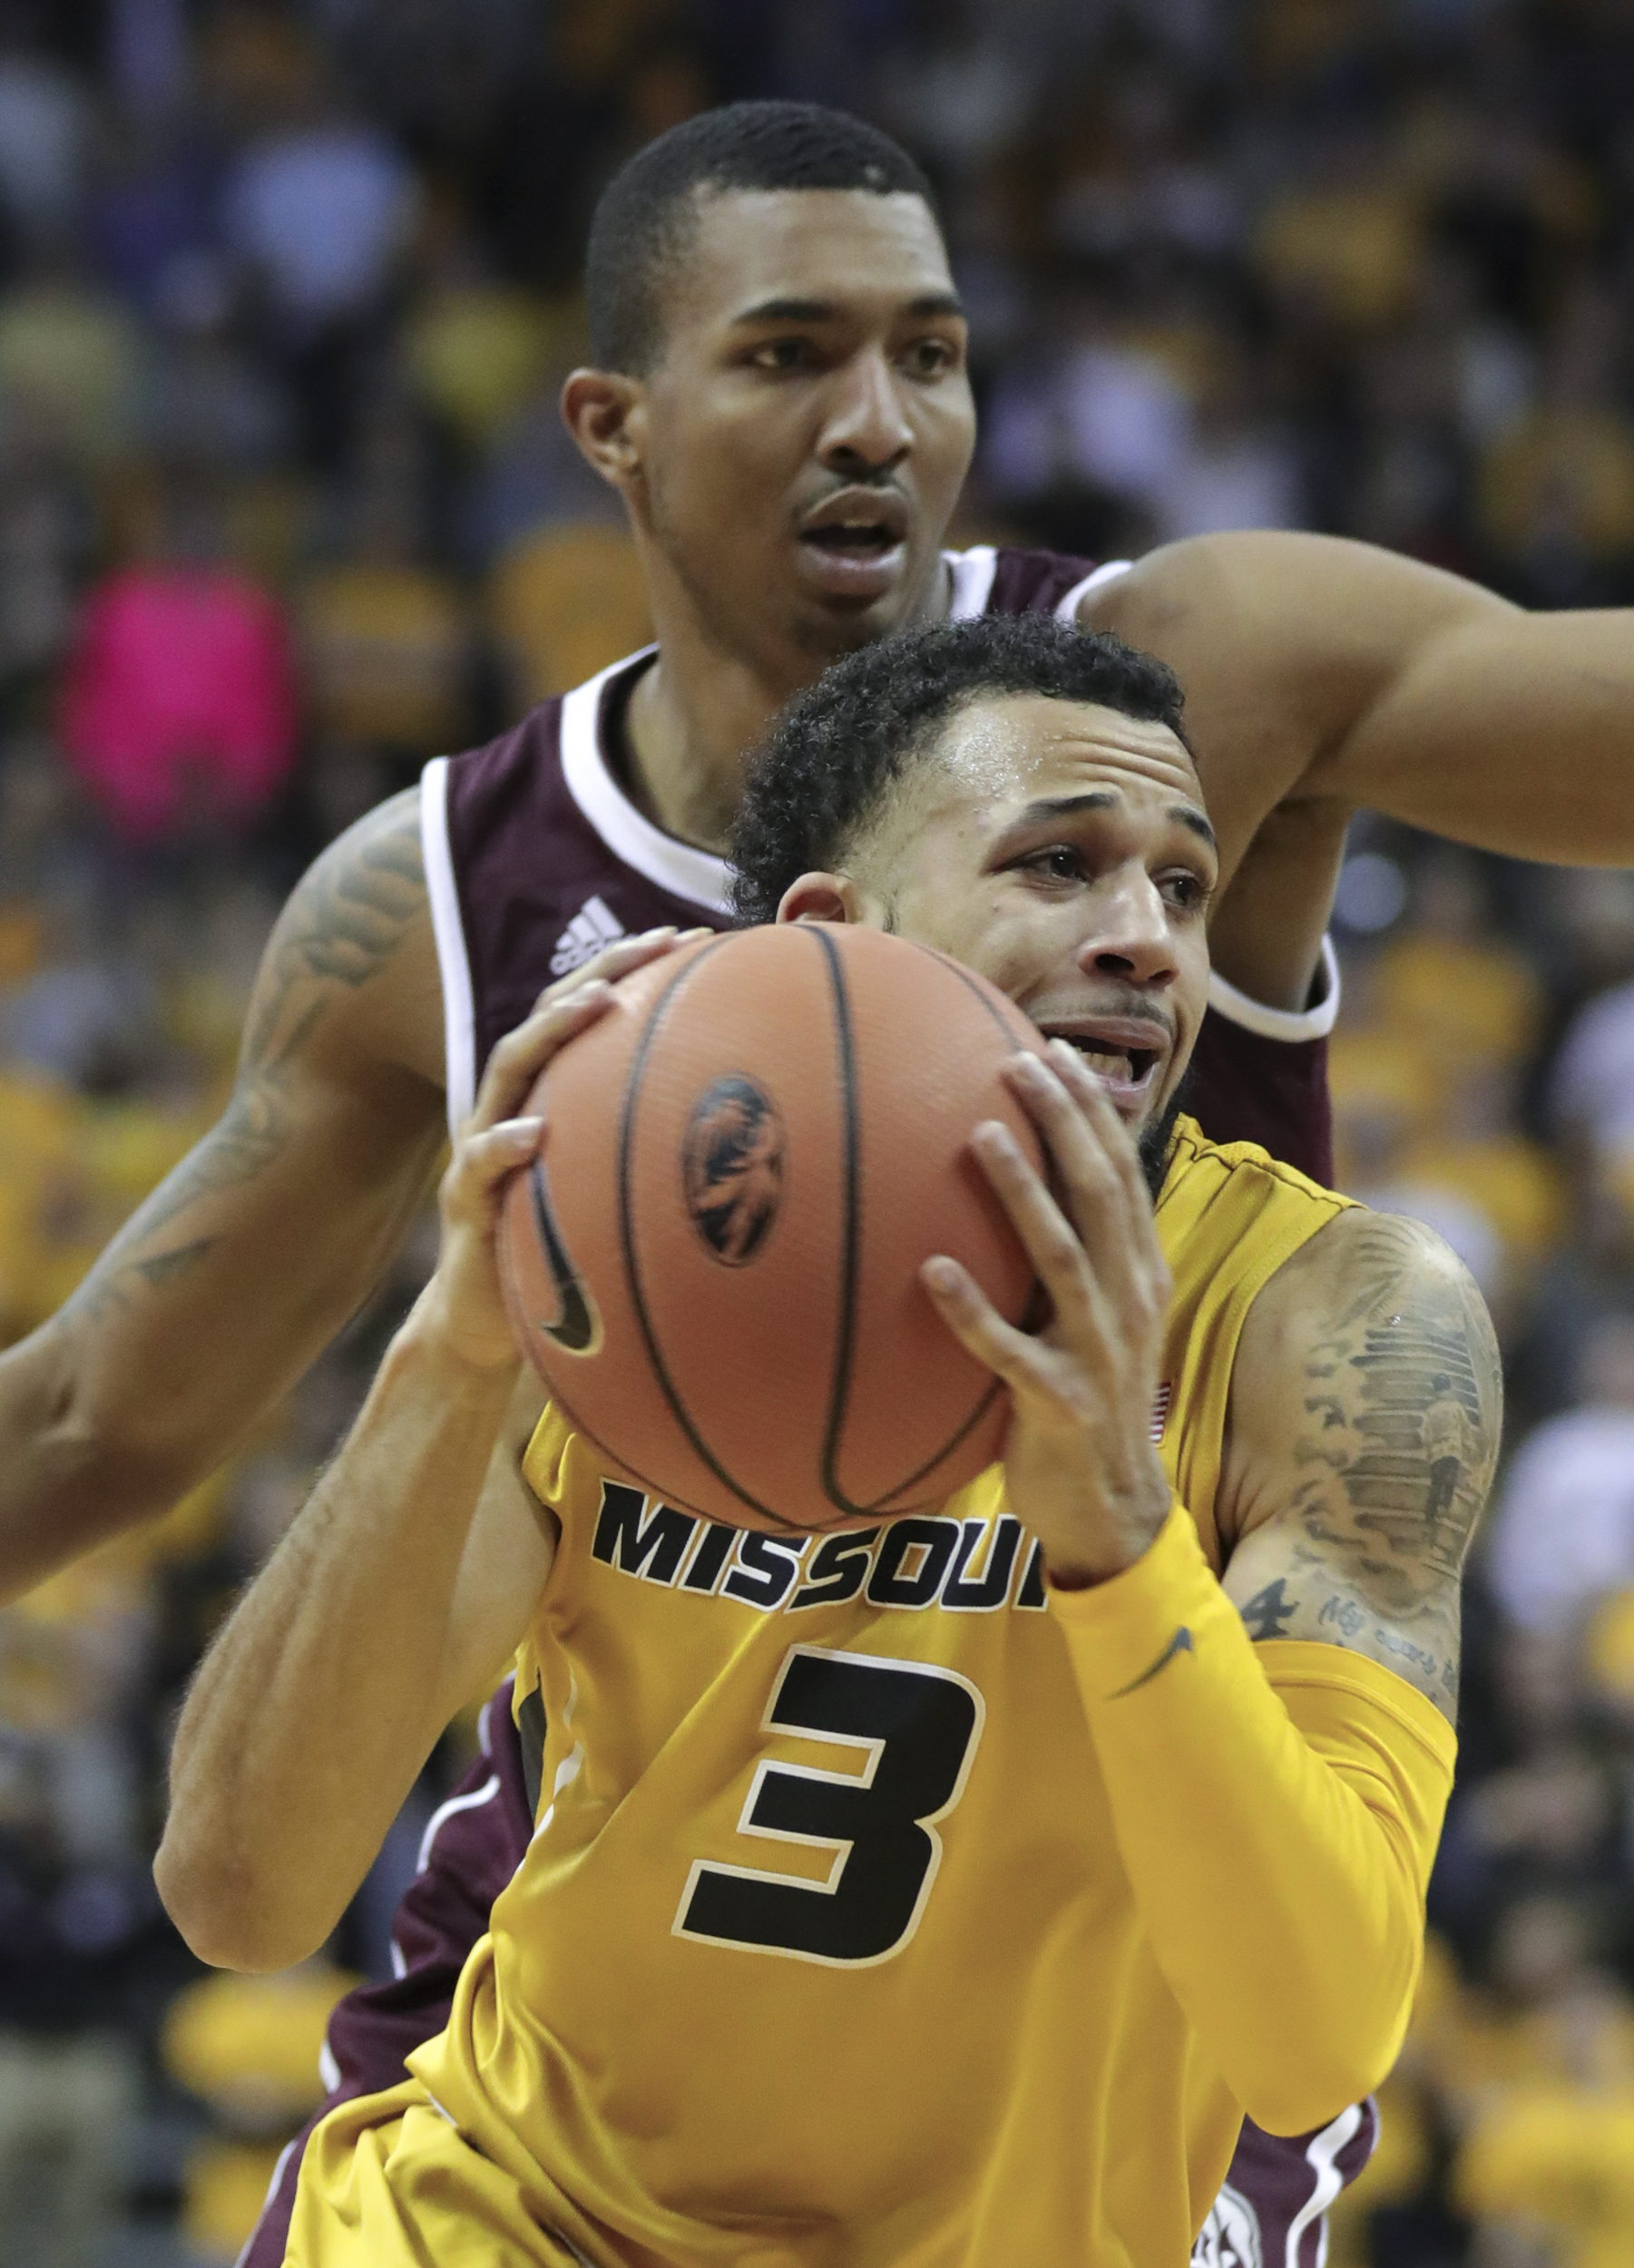  Kassius Robertson drives the ball while Xavian Stapleton chases during Missouri's 89-85 overtime victory over Mississippi State on Saturday, Feb. 10, 2018 at Mizzou Arena. Robertson scored a team-high 22 points.&nbsp; 